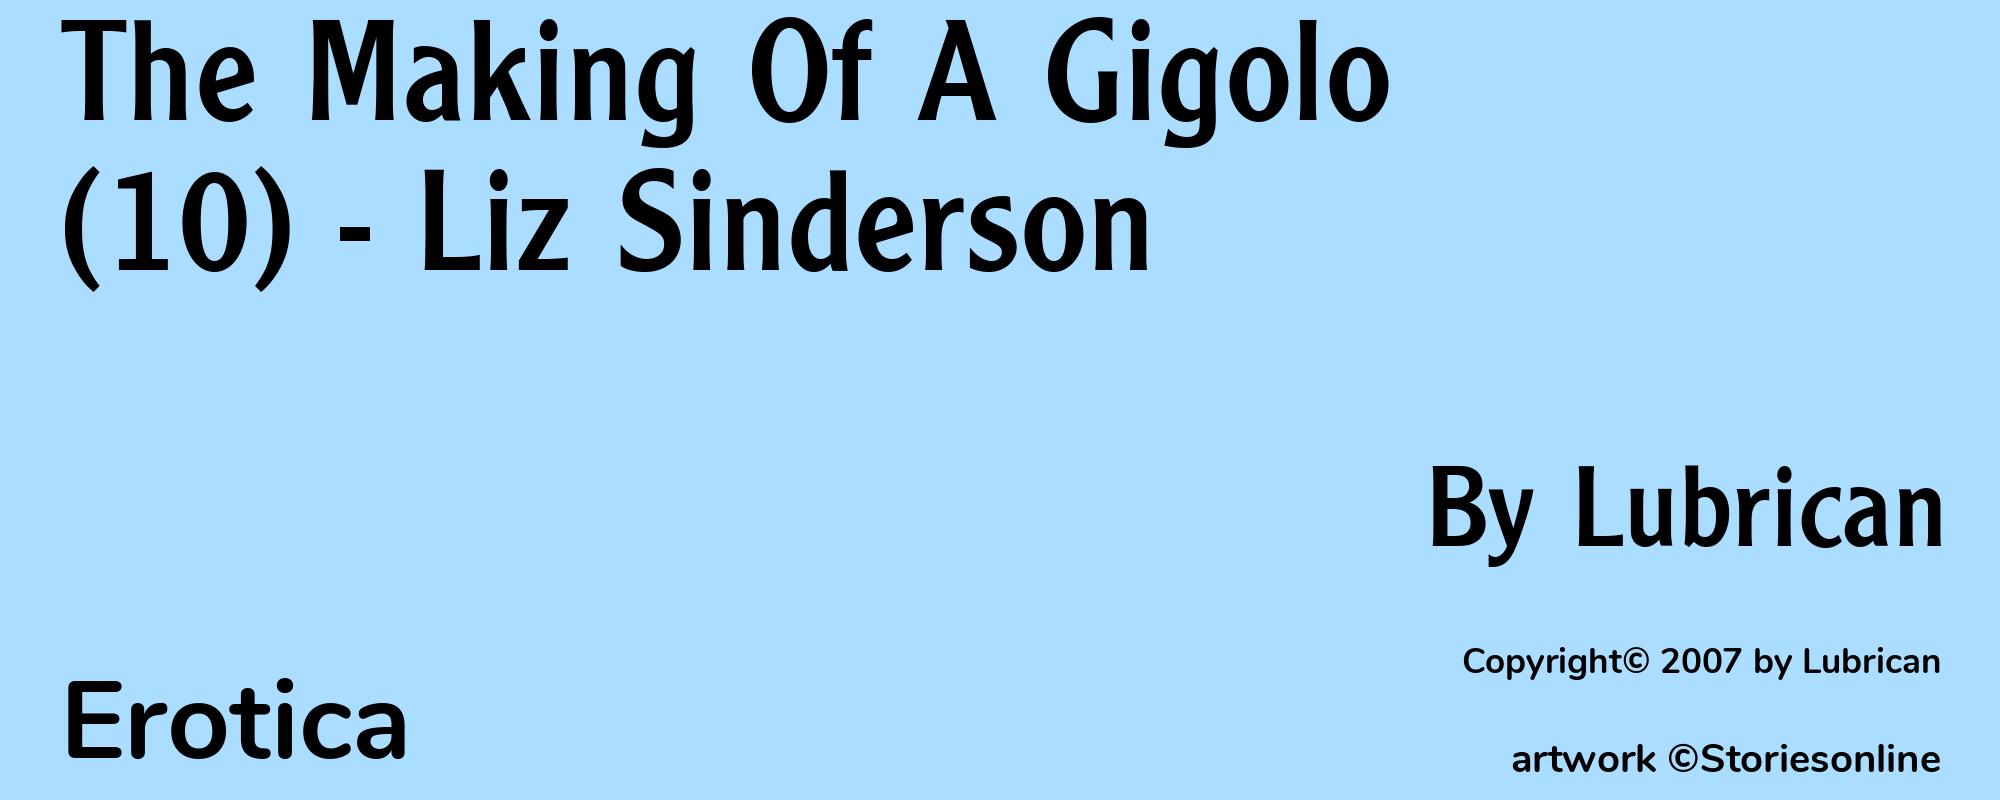 The Making Of A Gigolo (10) - Liz Sinderson - Cover